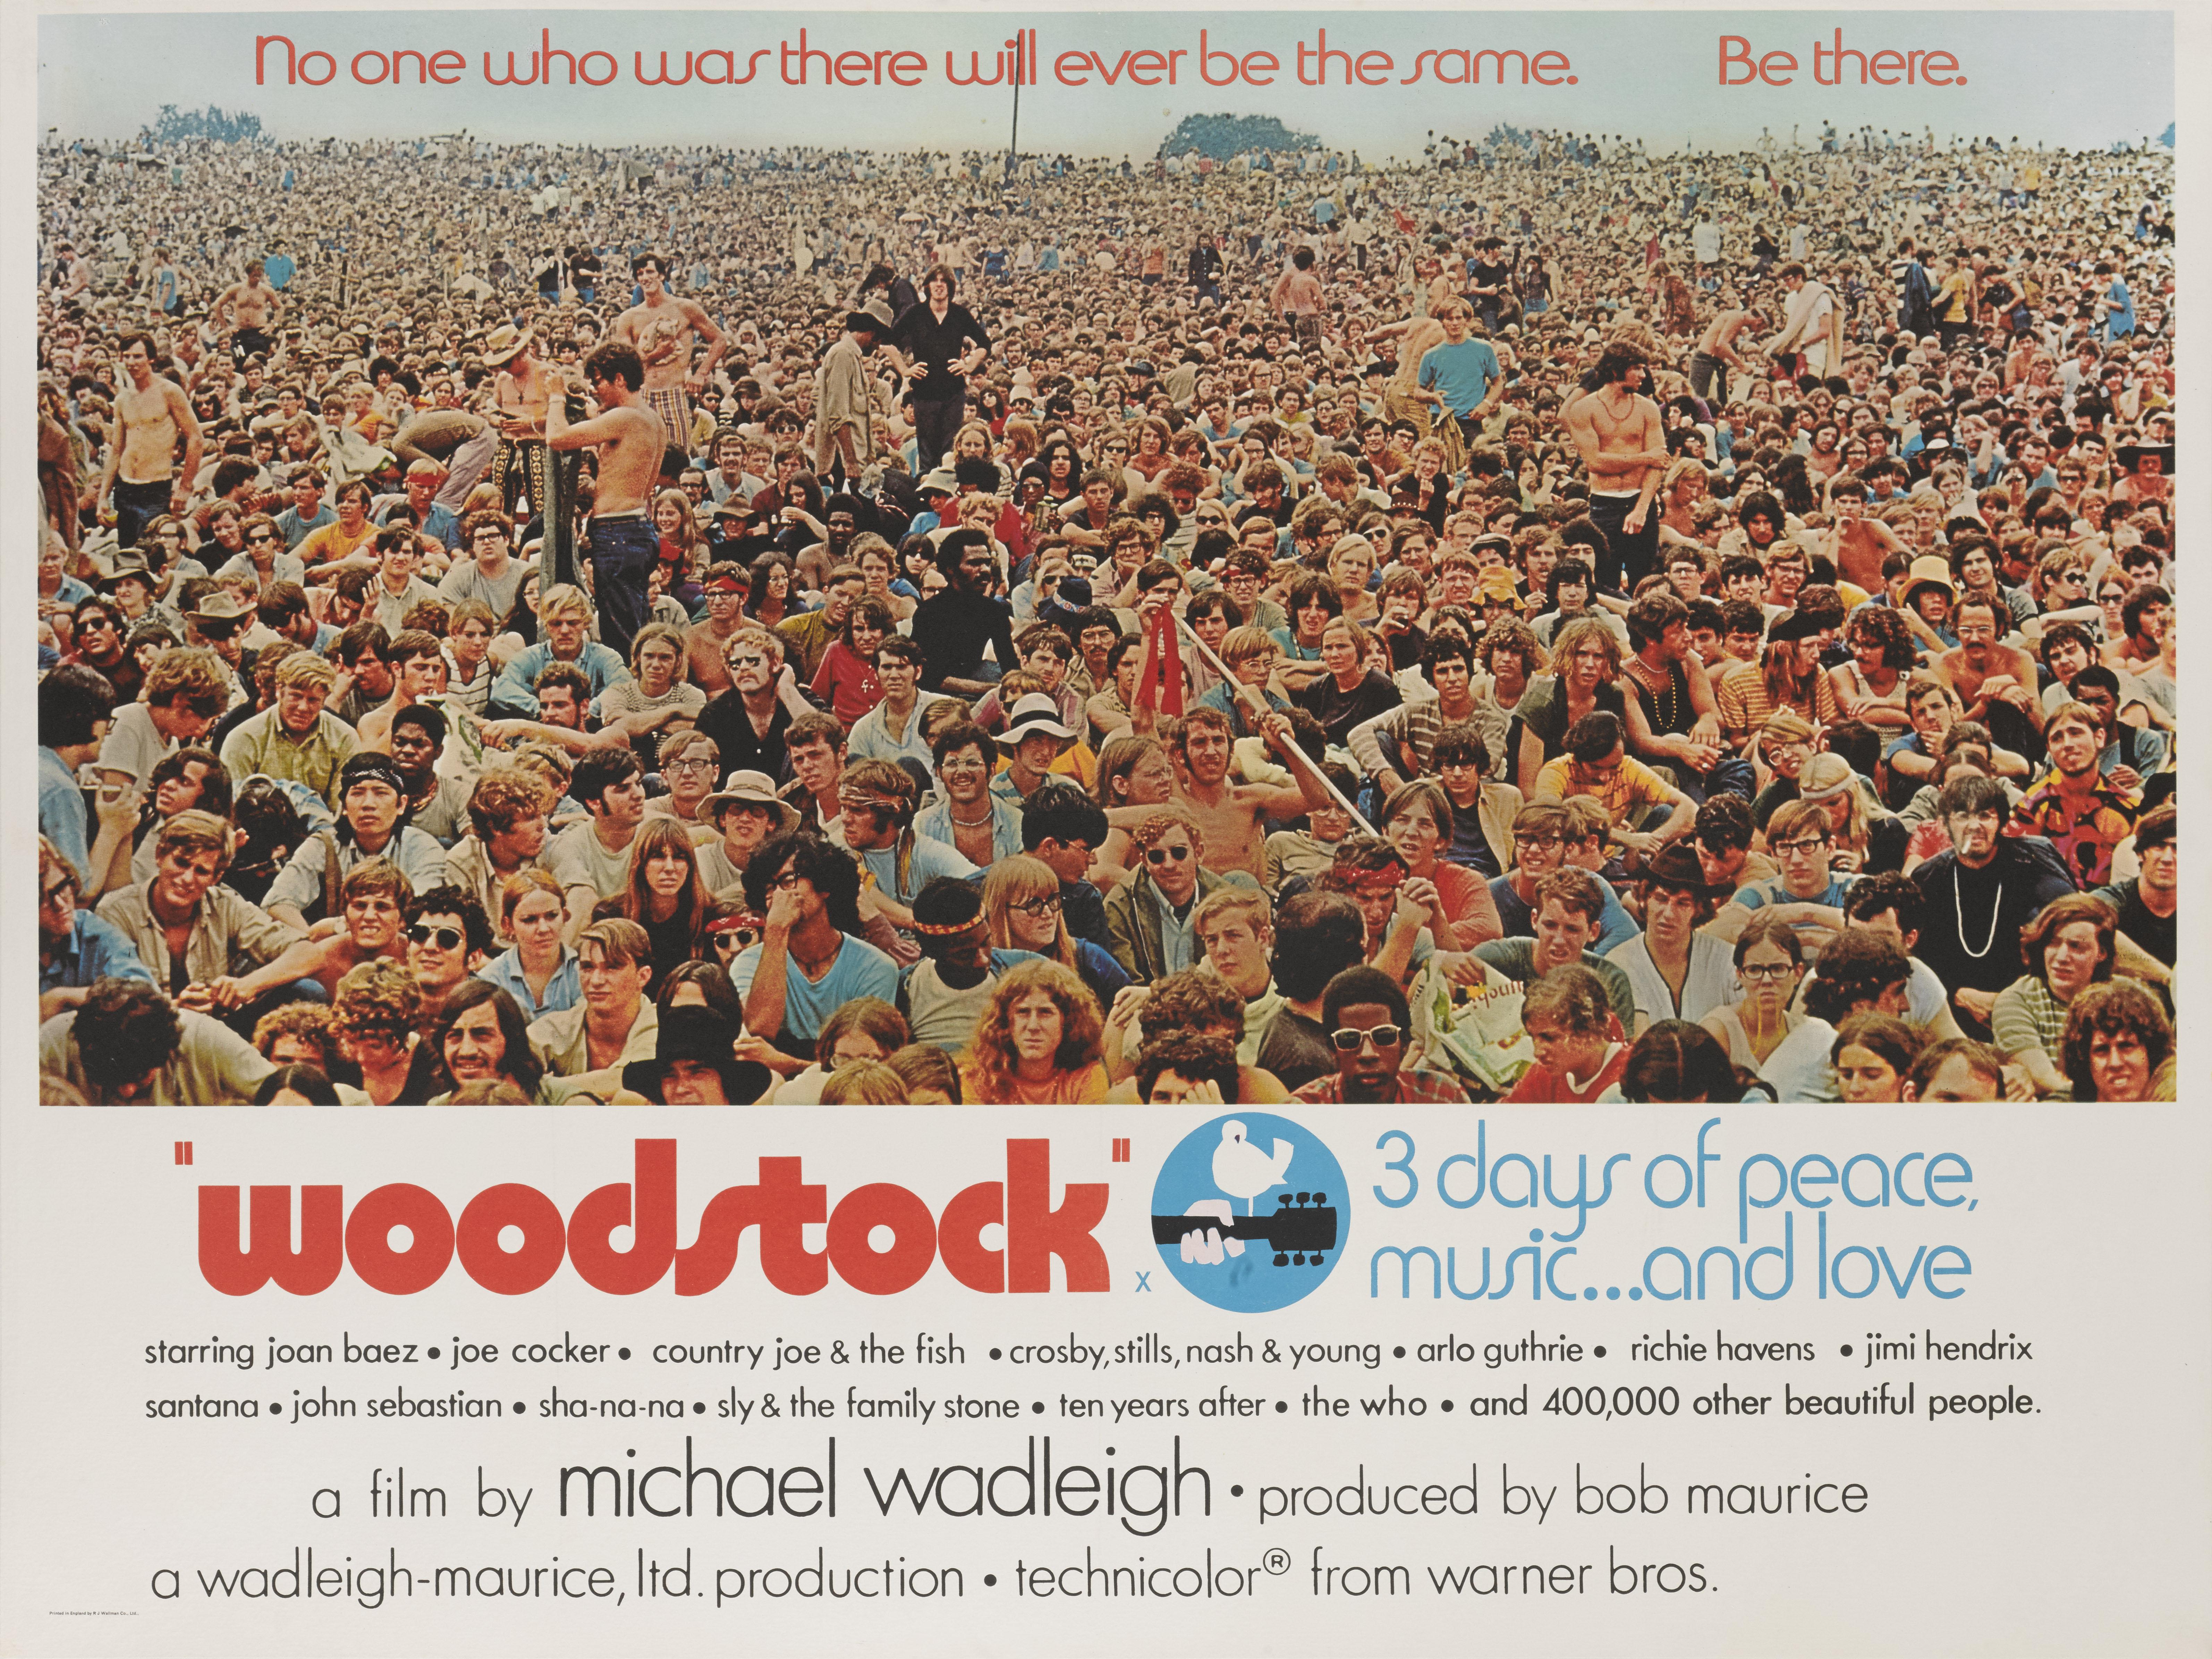 Original British film poster for the landmark documentary about the Woodstock Festival, which took place in August 1969 in the town of Bethel, New York State, where half a million people came together for 'Three Days of Peace and Music'.
This